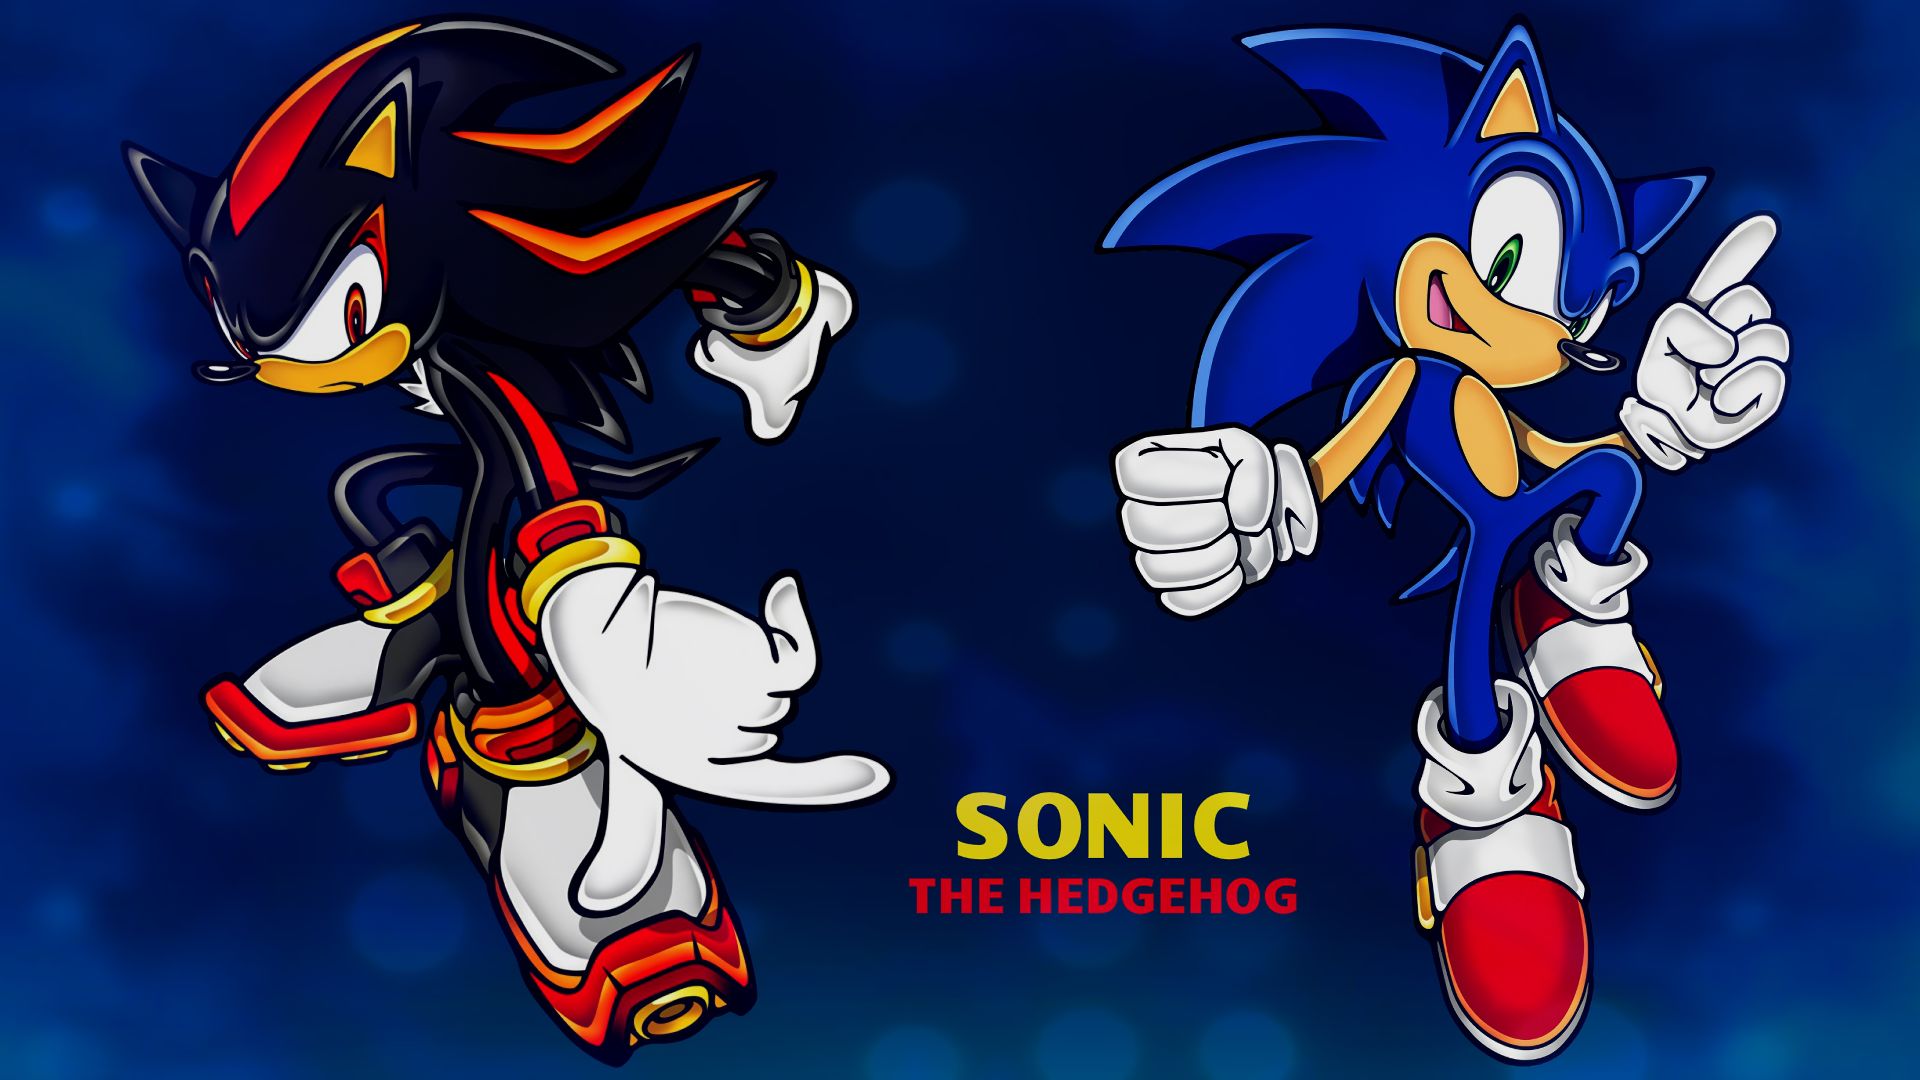 video game, sonic adventure 2, blue, shadow the hedgehog, sonic the hedgehog, sonic